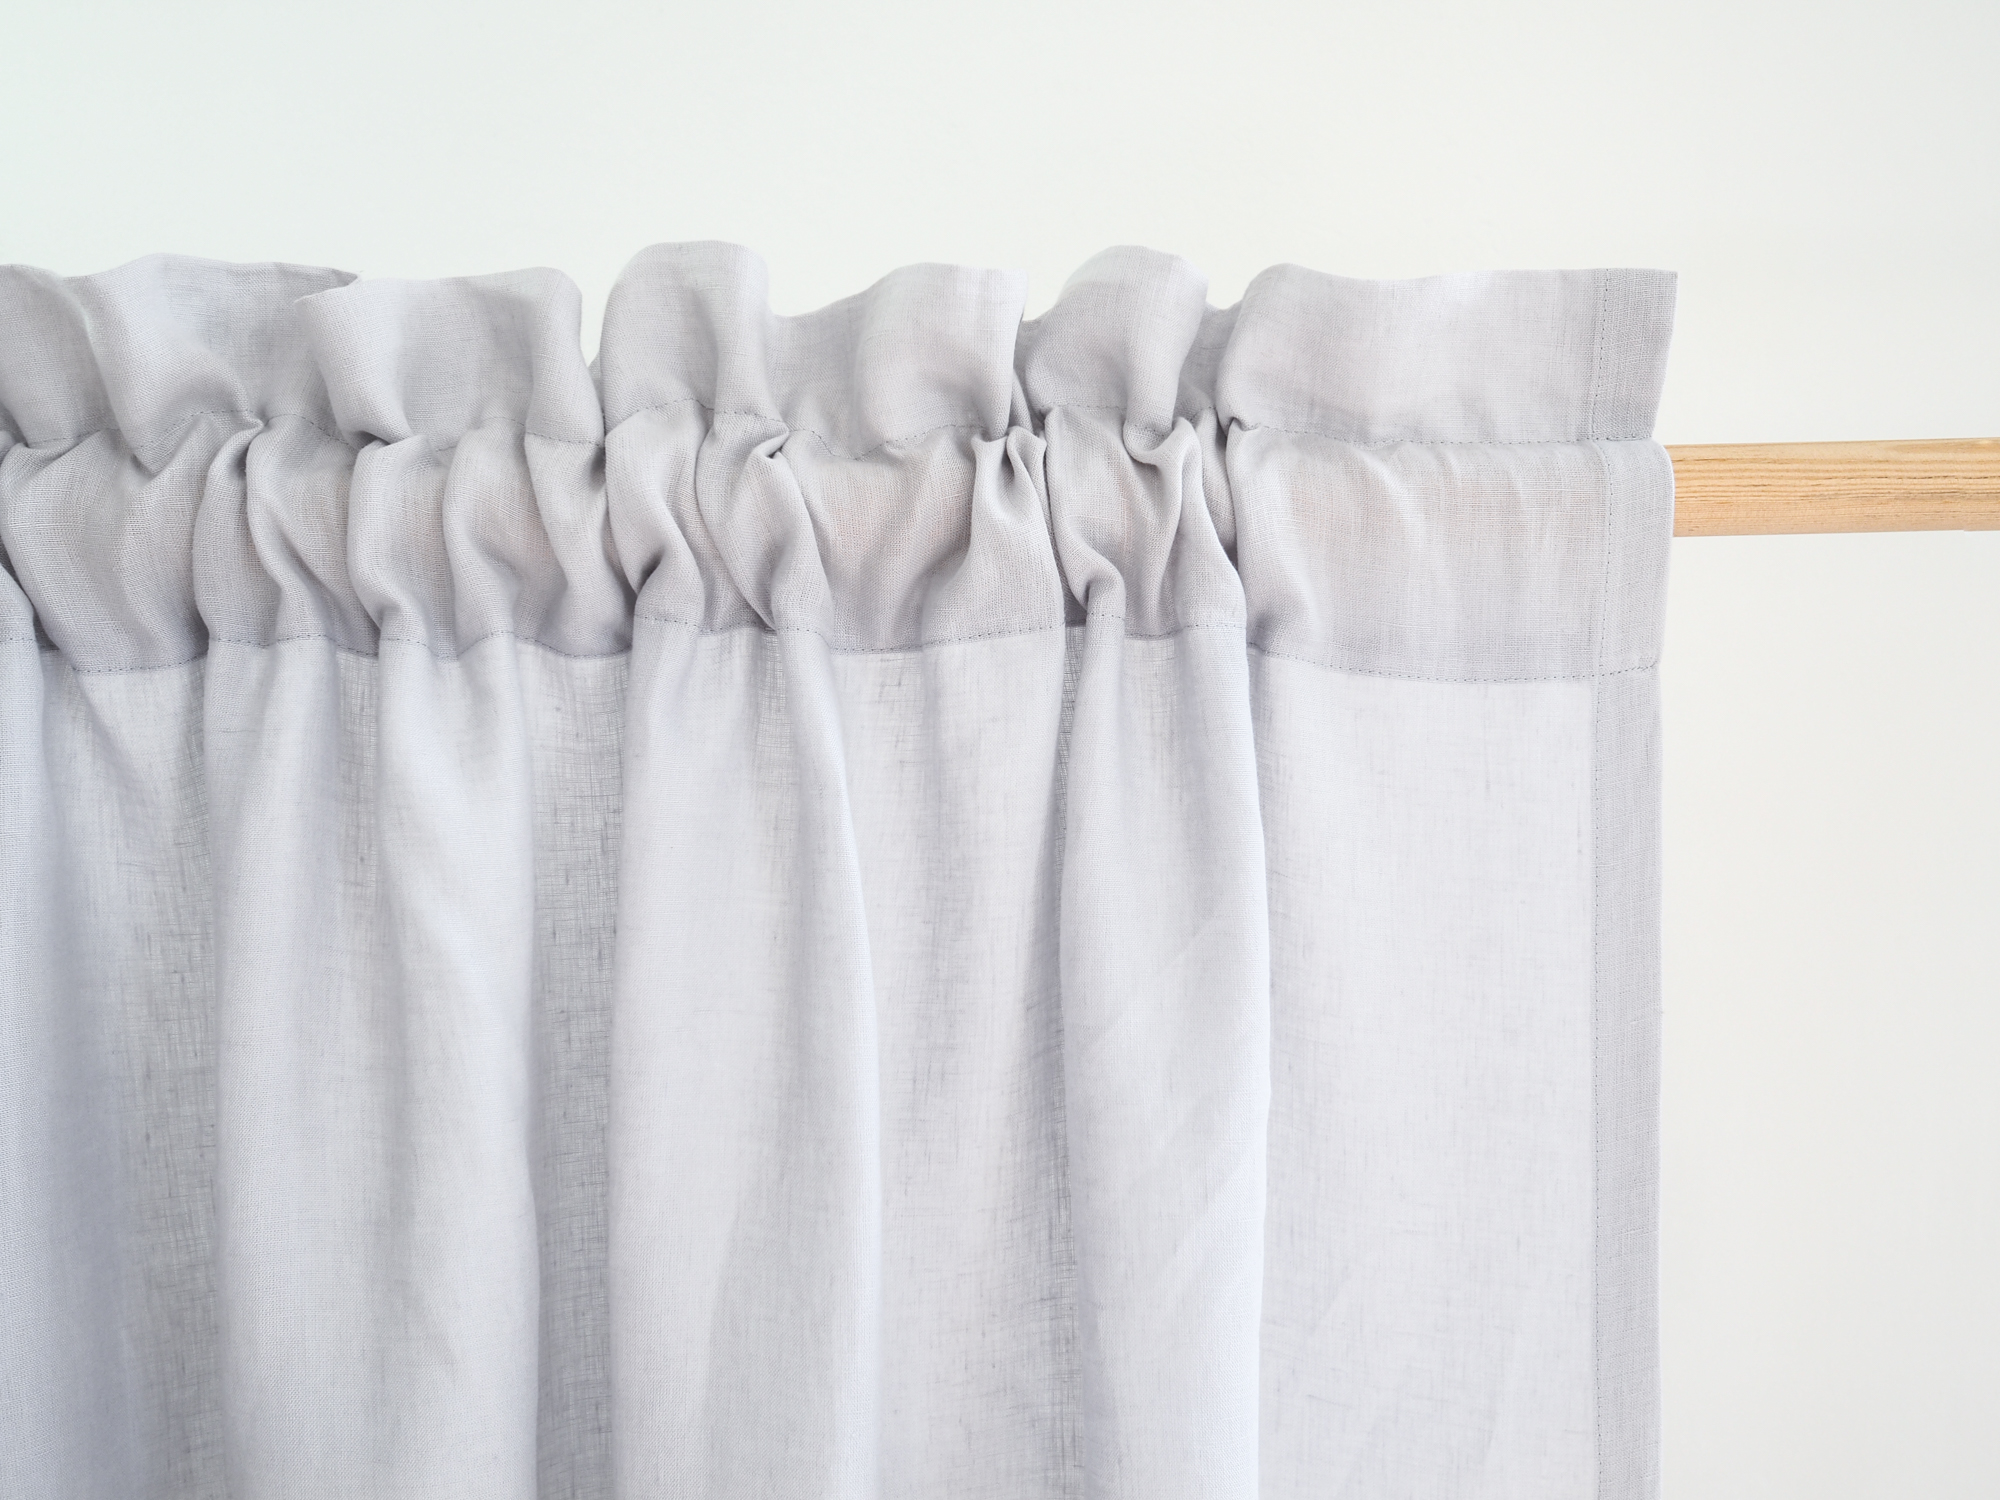 Light gray curtains with a header